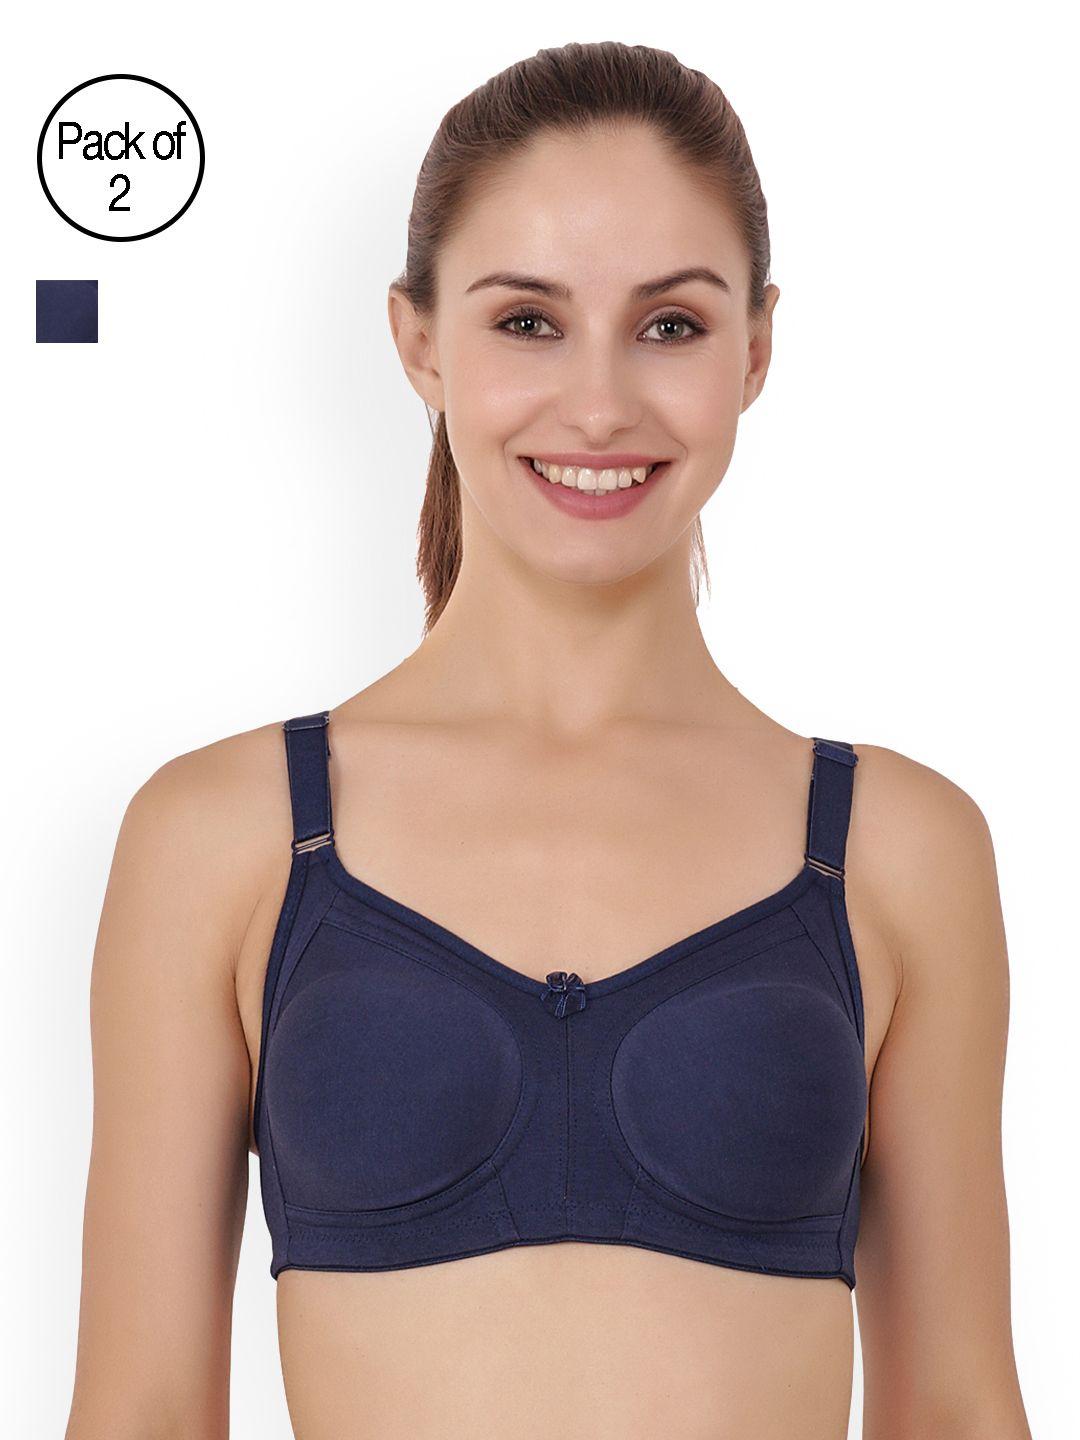 floret pack of 2 solid full-coverage t-shirt bras t3033